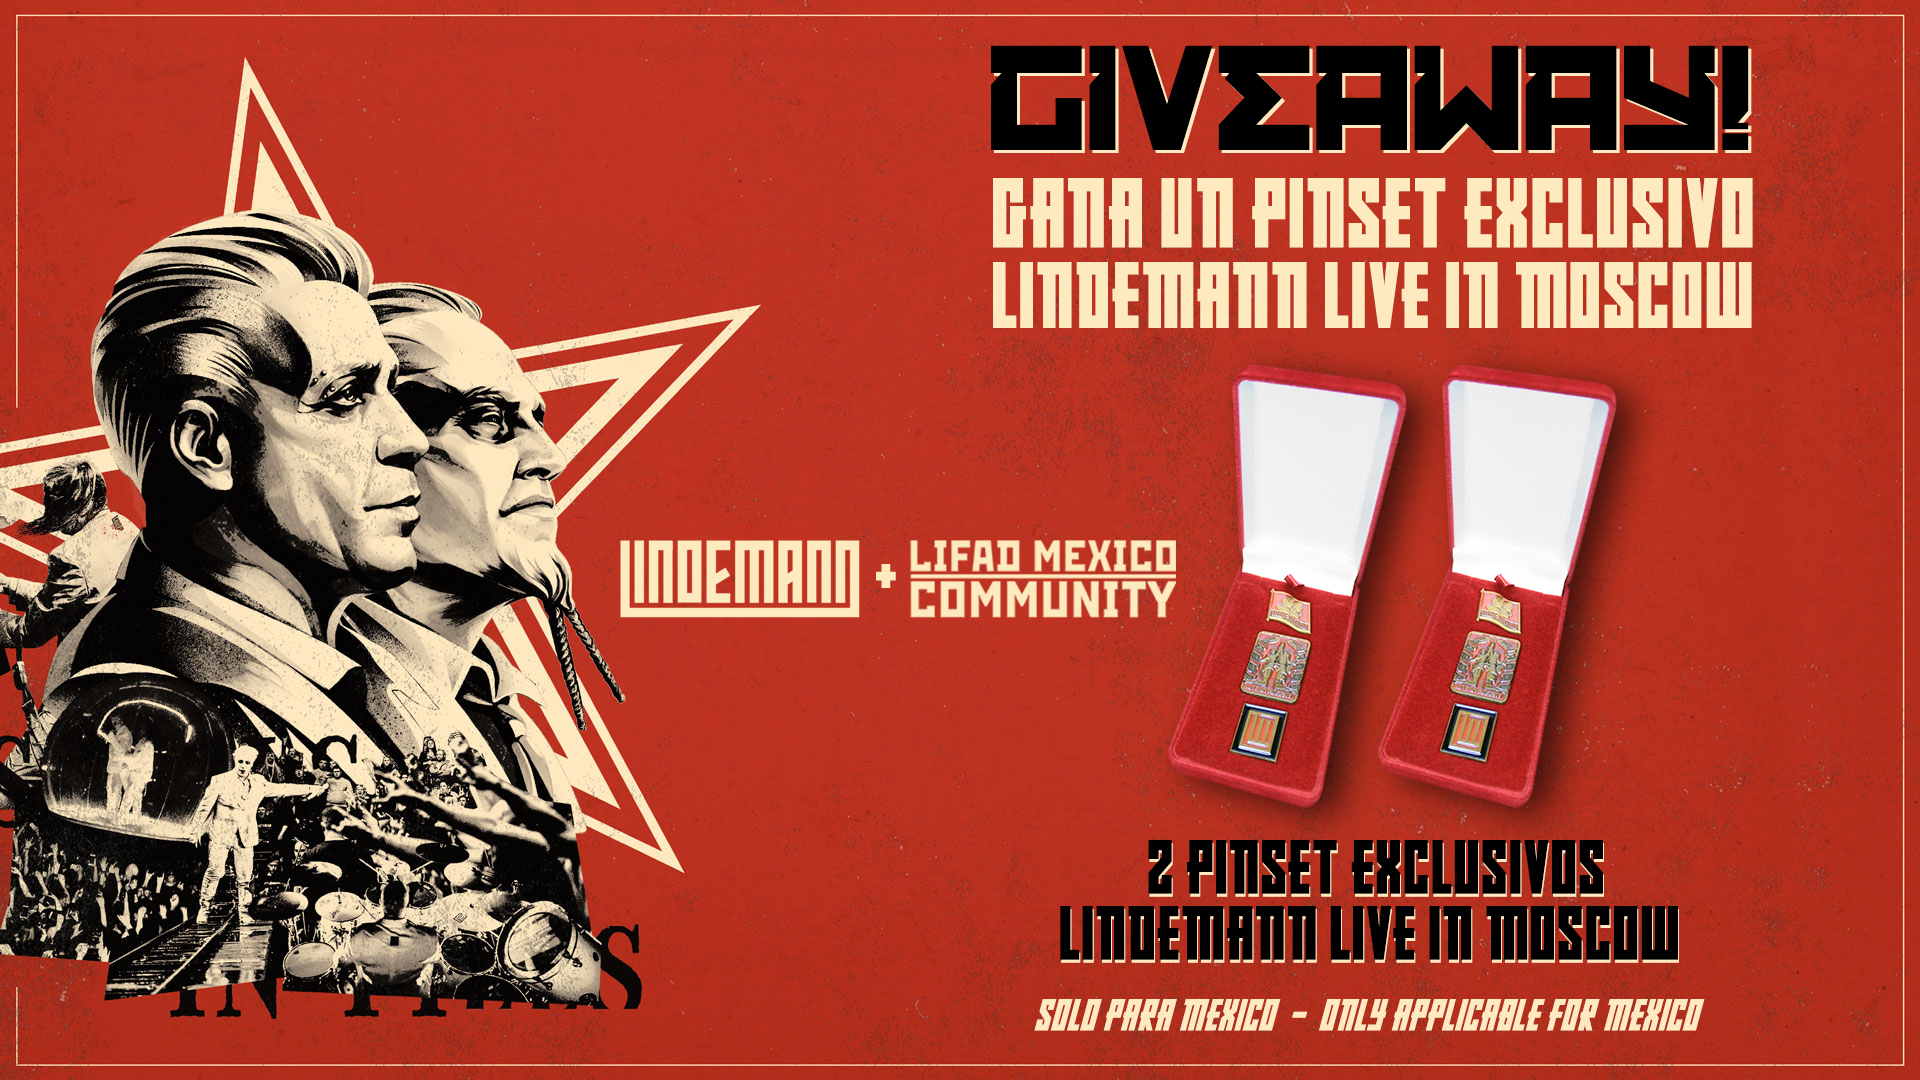 GIVEAWAY PINSET EXCLUSIVO LINDEMANN LIVE IN MOSCOW